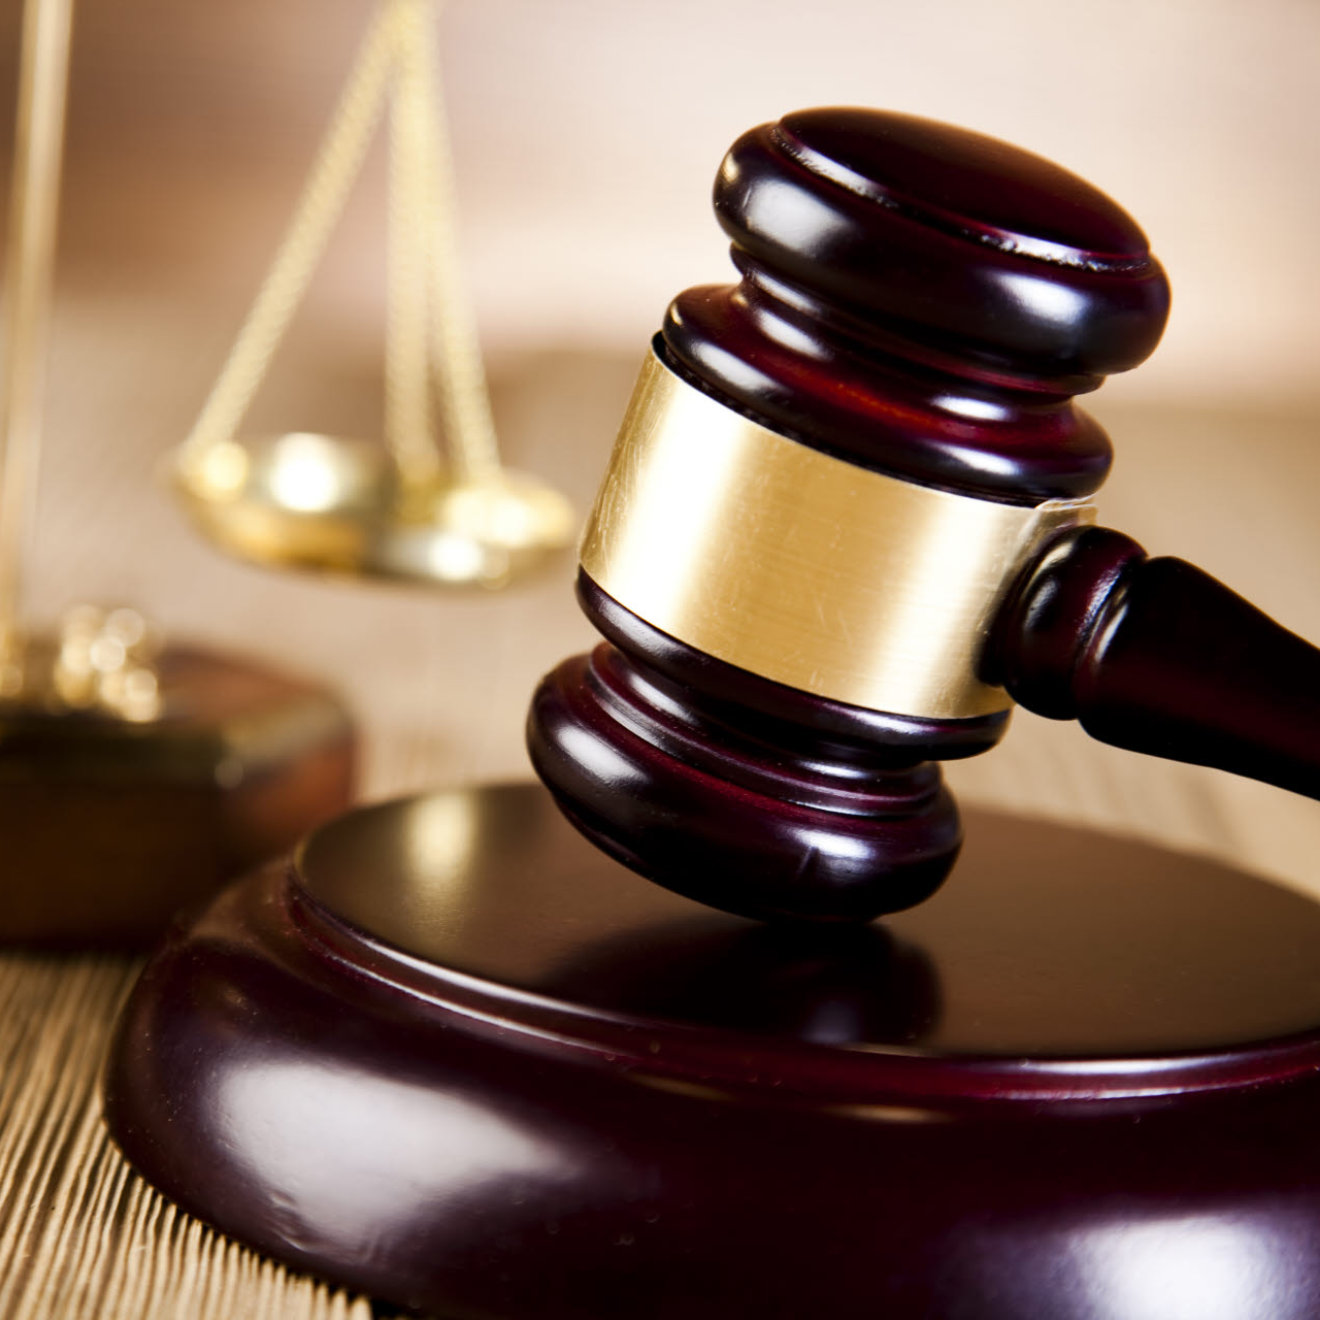 /gavel-scales-of-justice-court-law-shutterstock